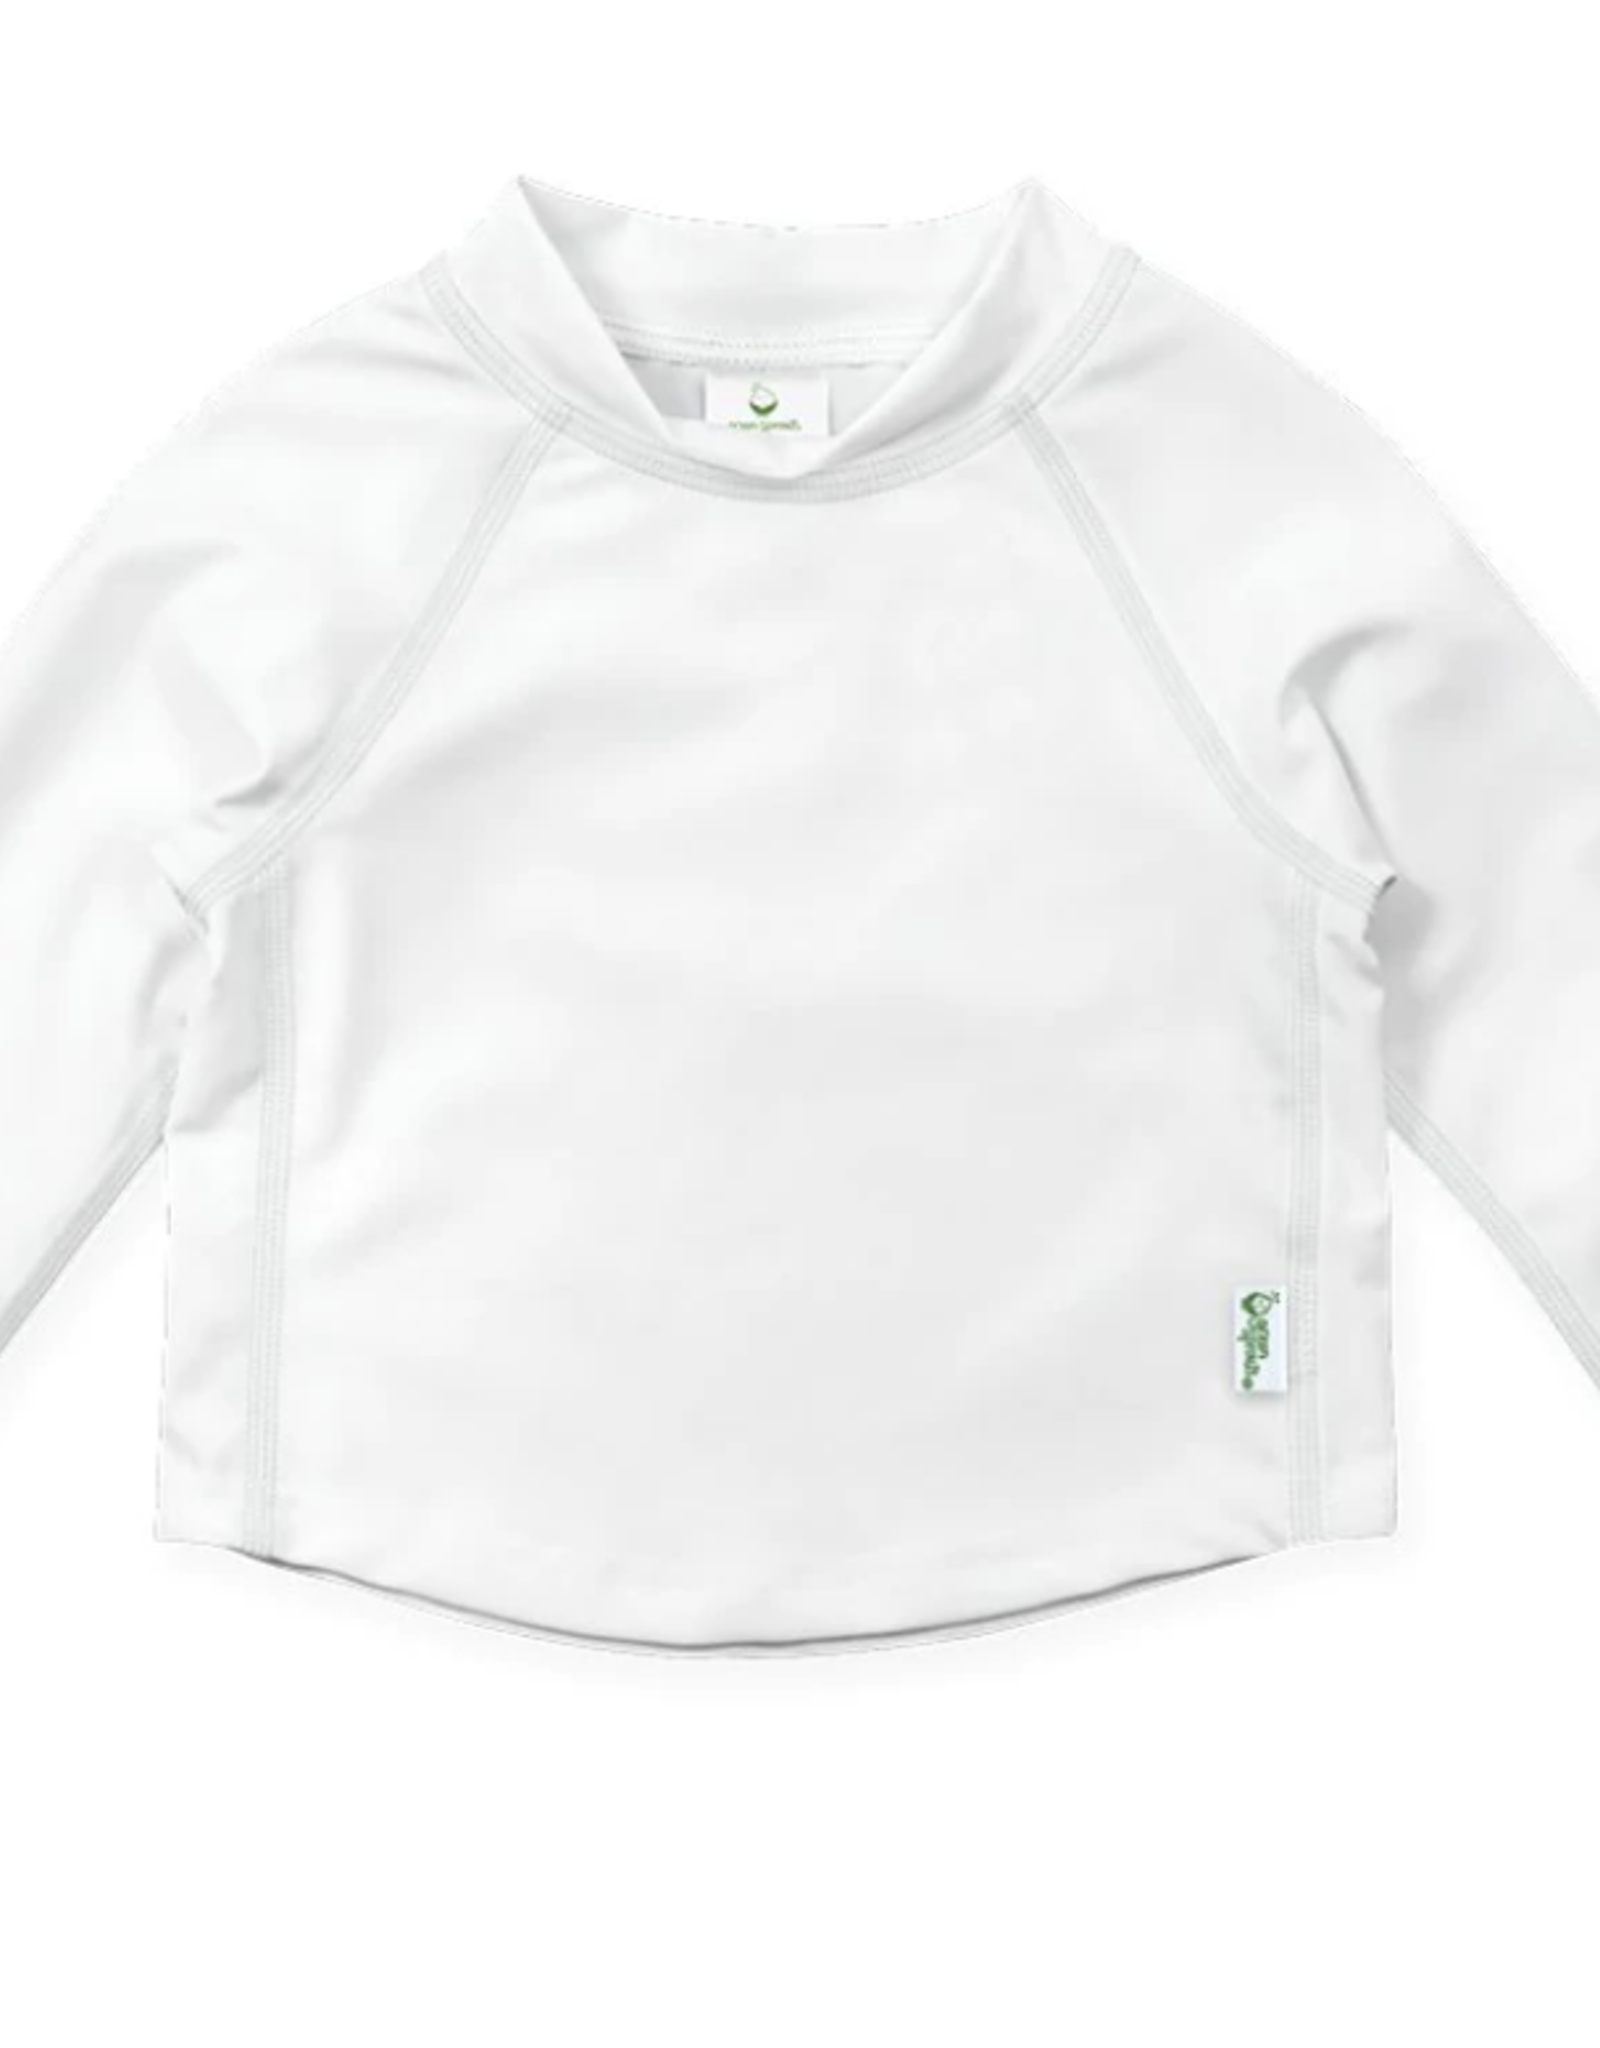 Green Sprouts Long Sleeve White Rash Guard